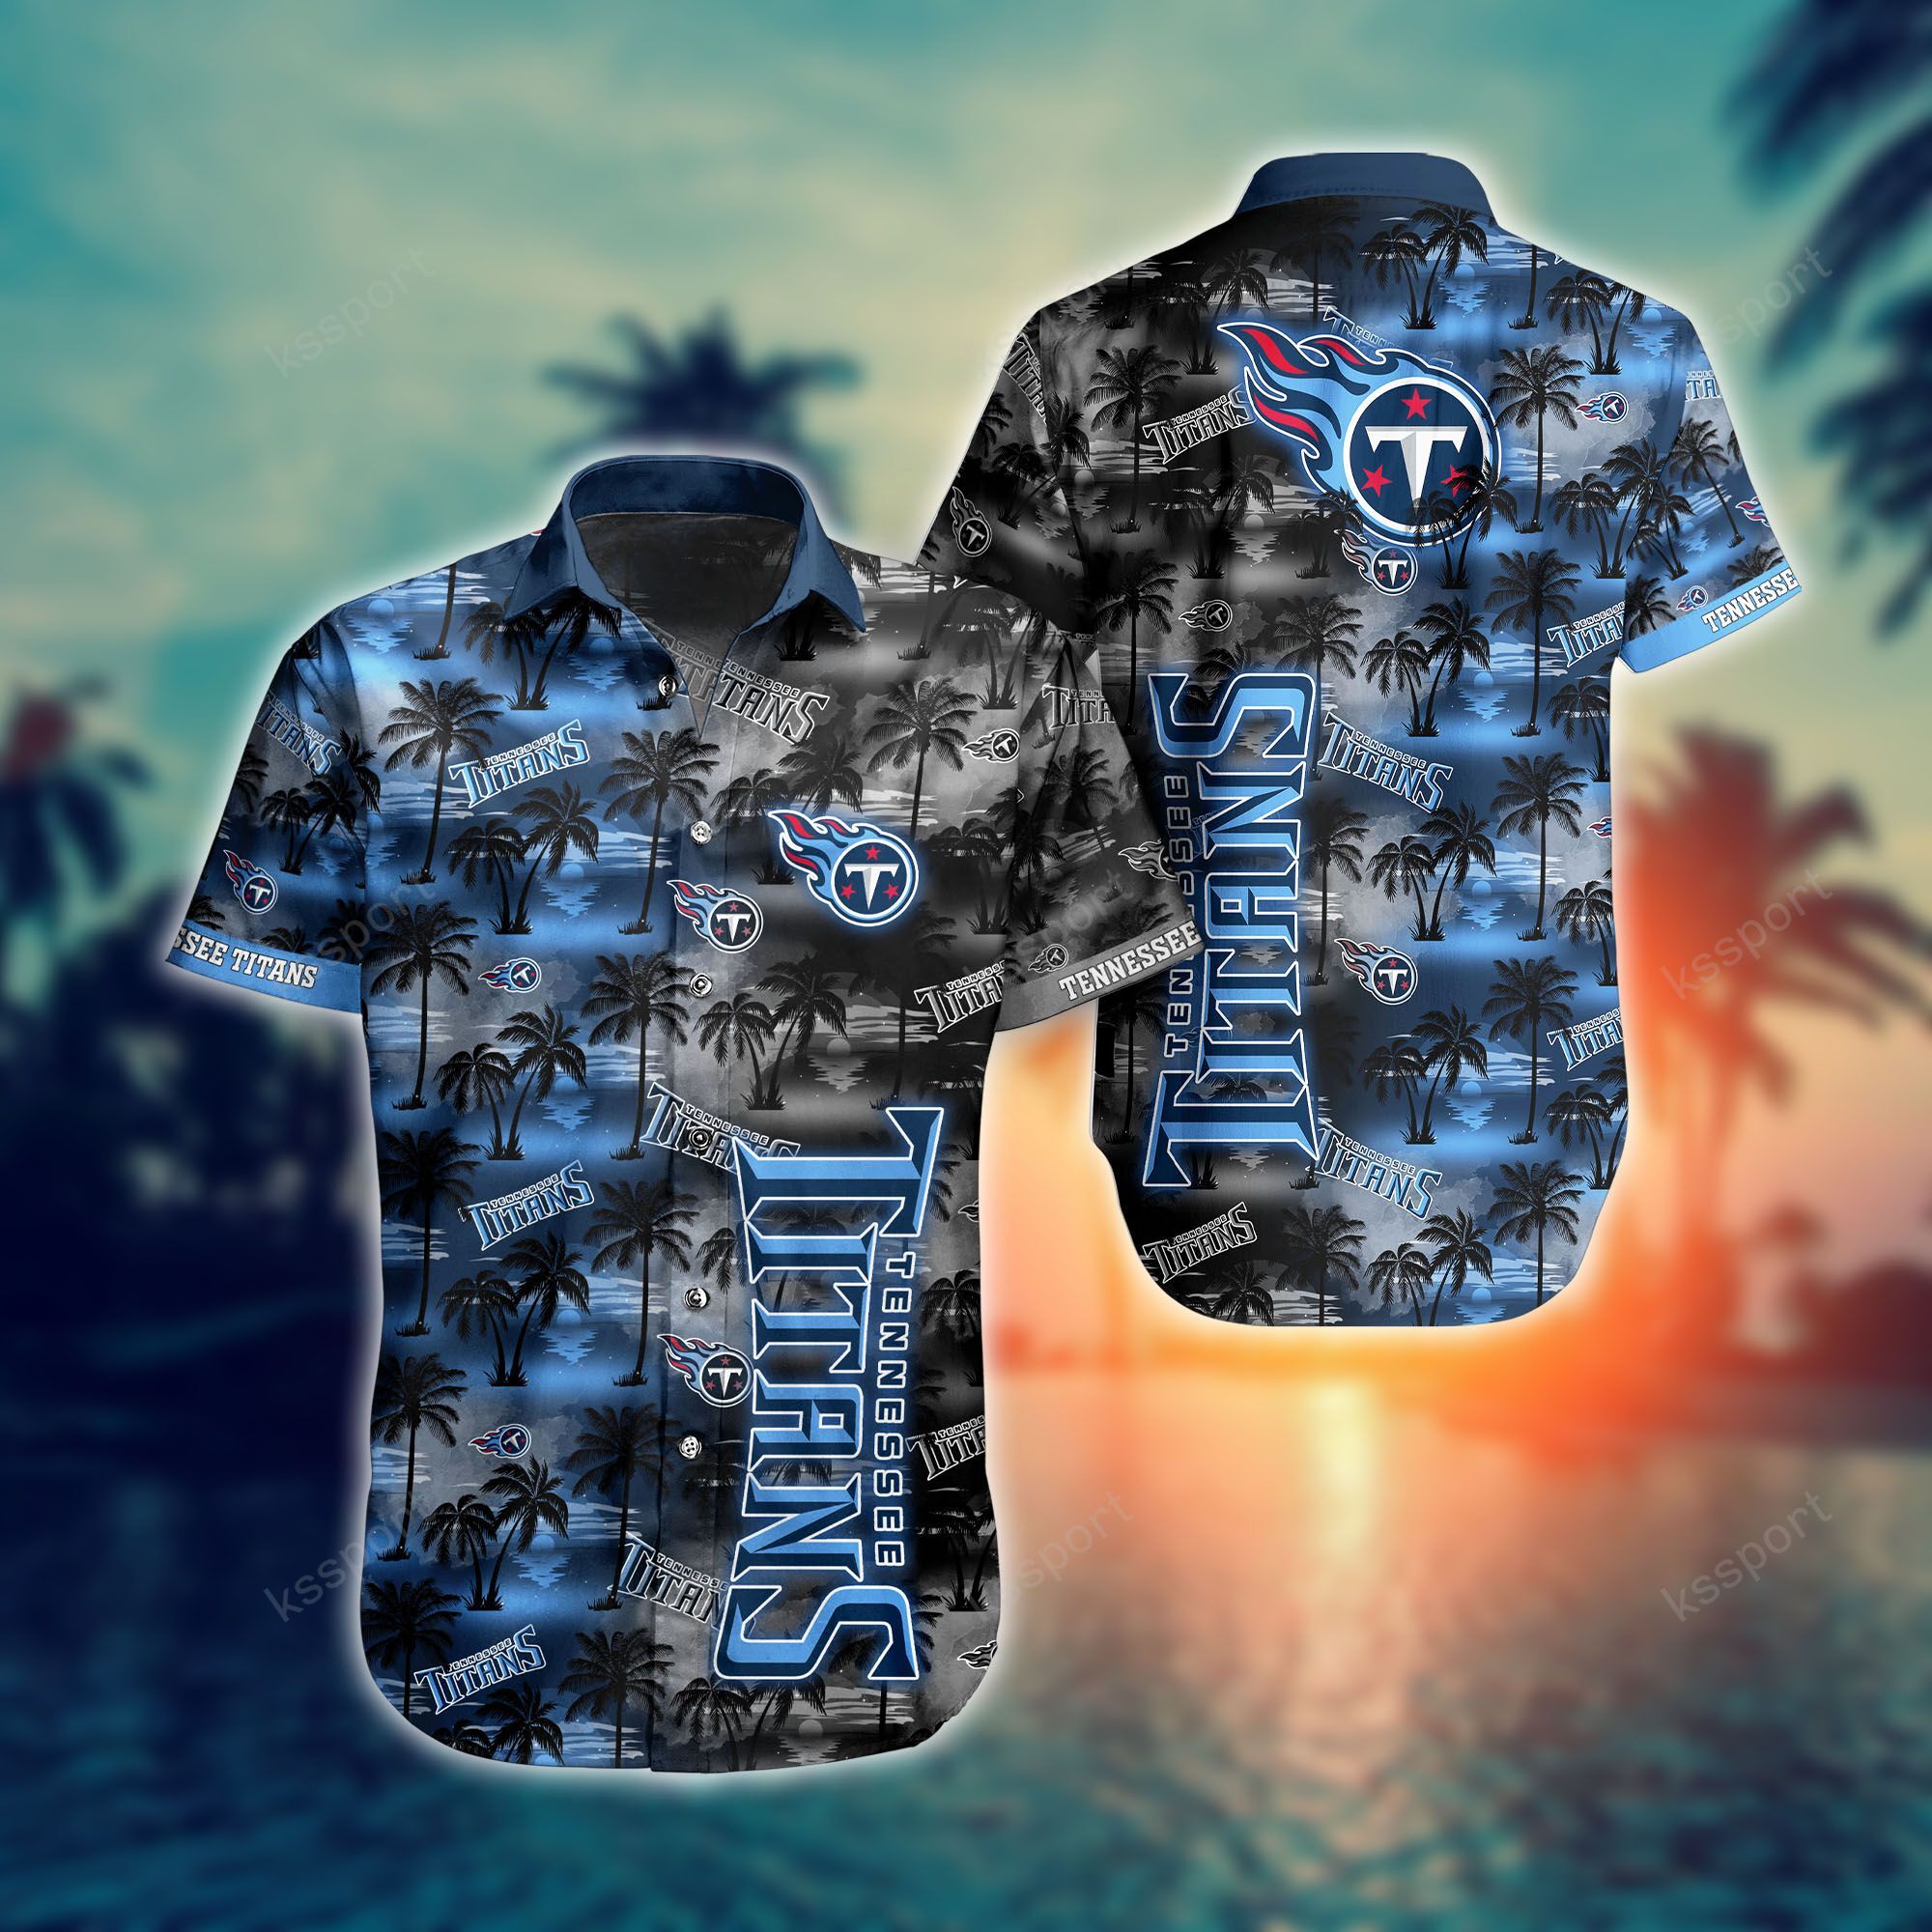 Treat yourself to a cool Hawaiian set today! 79